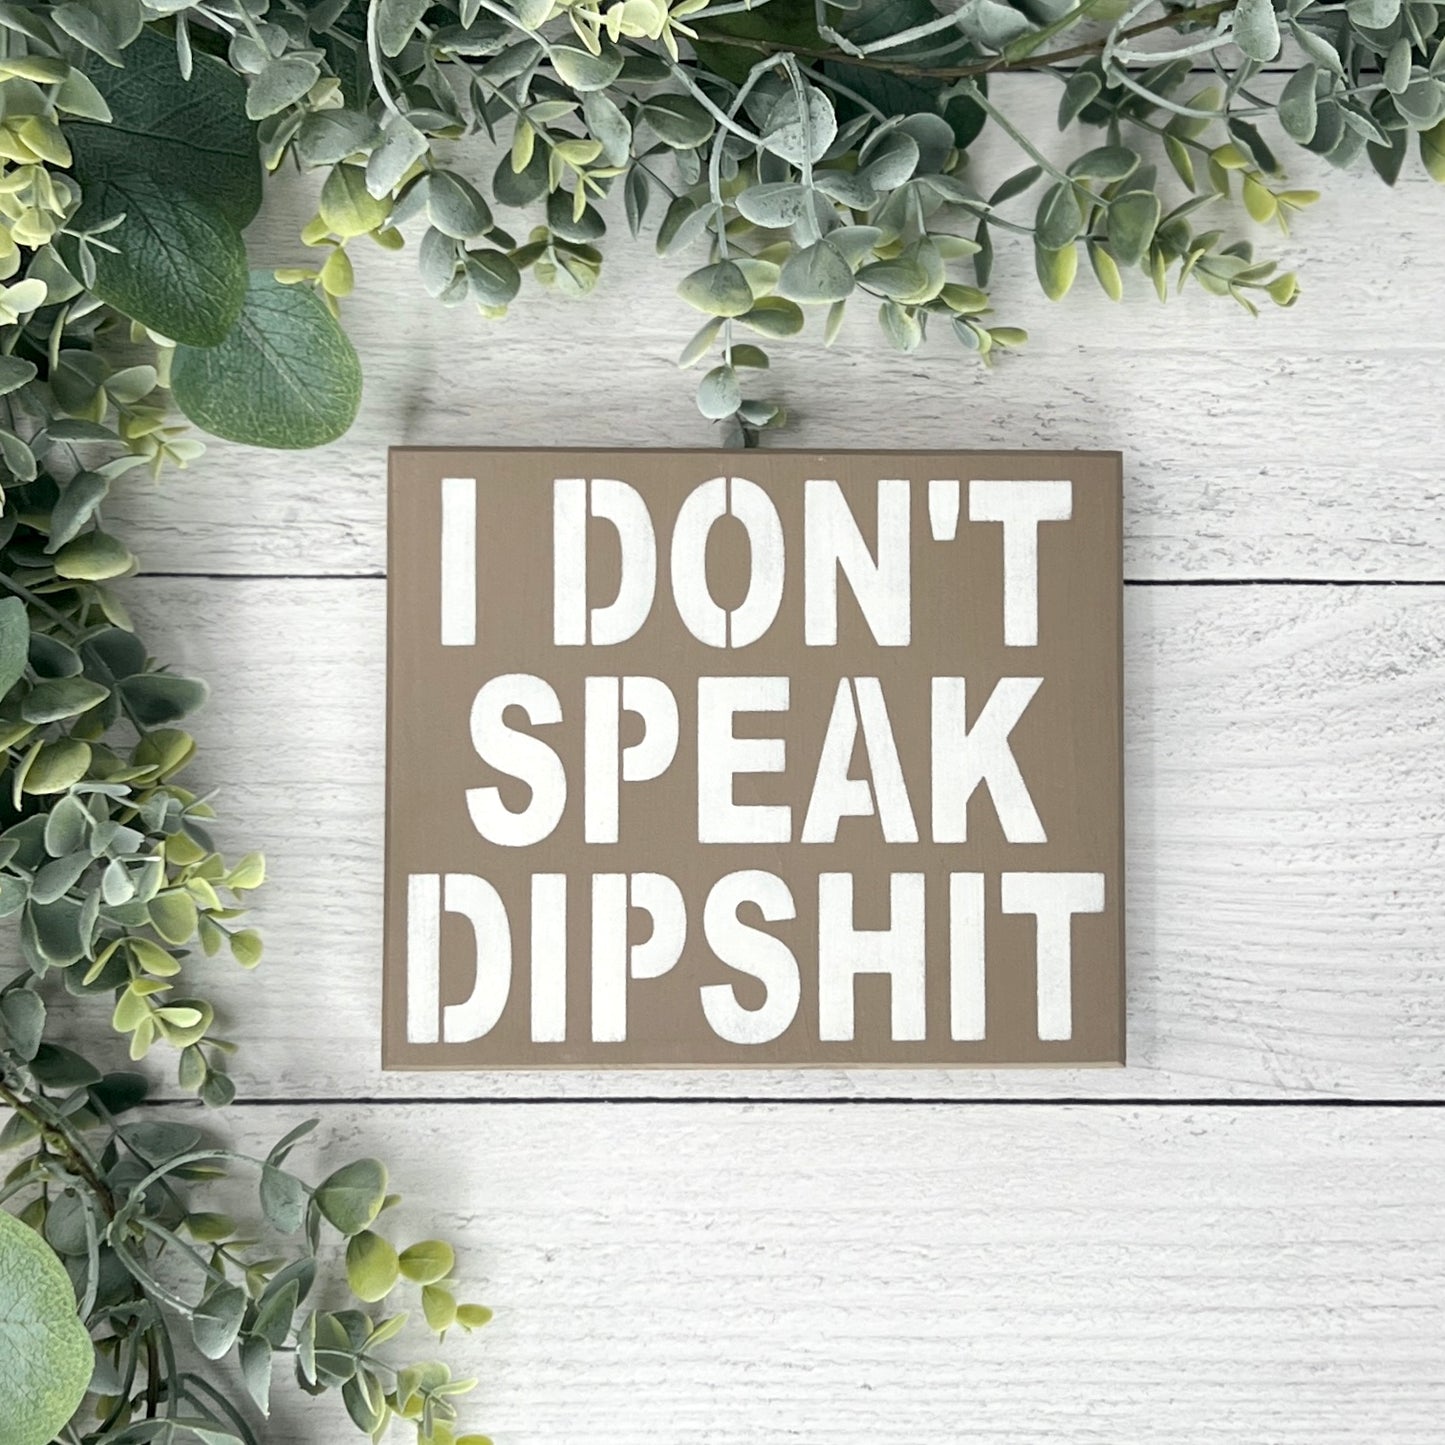 I don't speak dip shit funny wood sign - Neutral Wall Decor - Sarcastic home decor